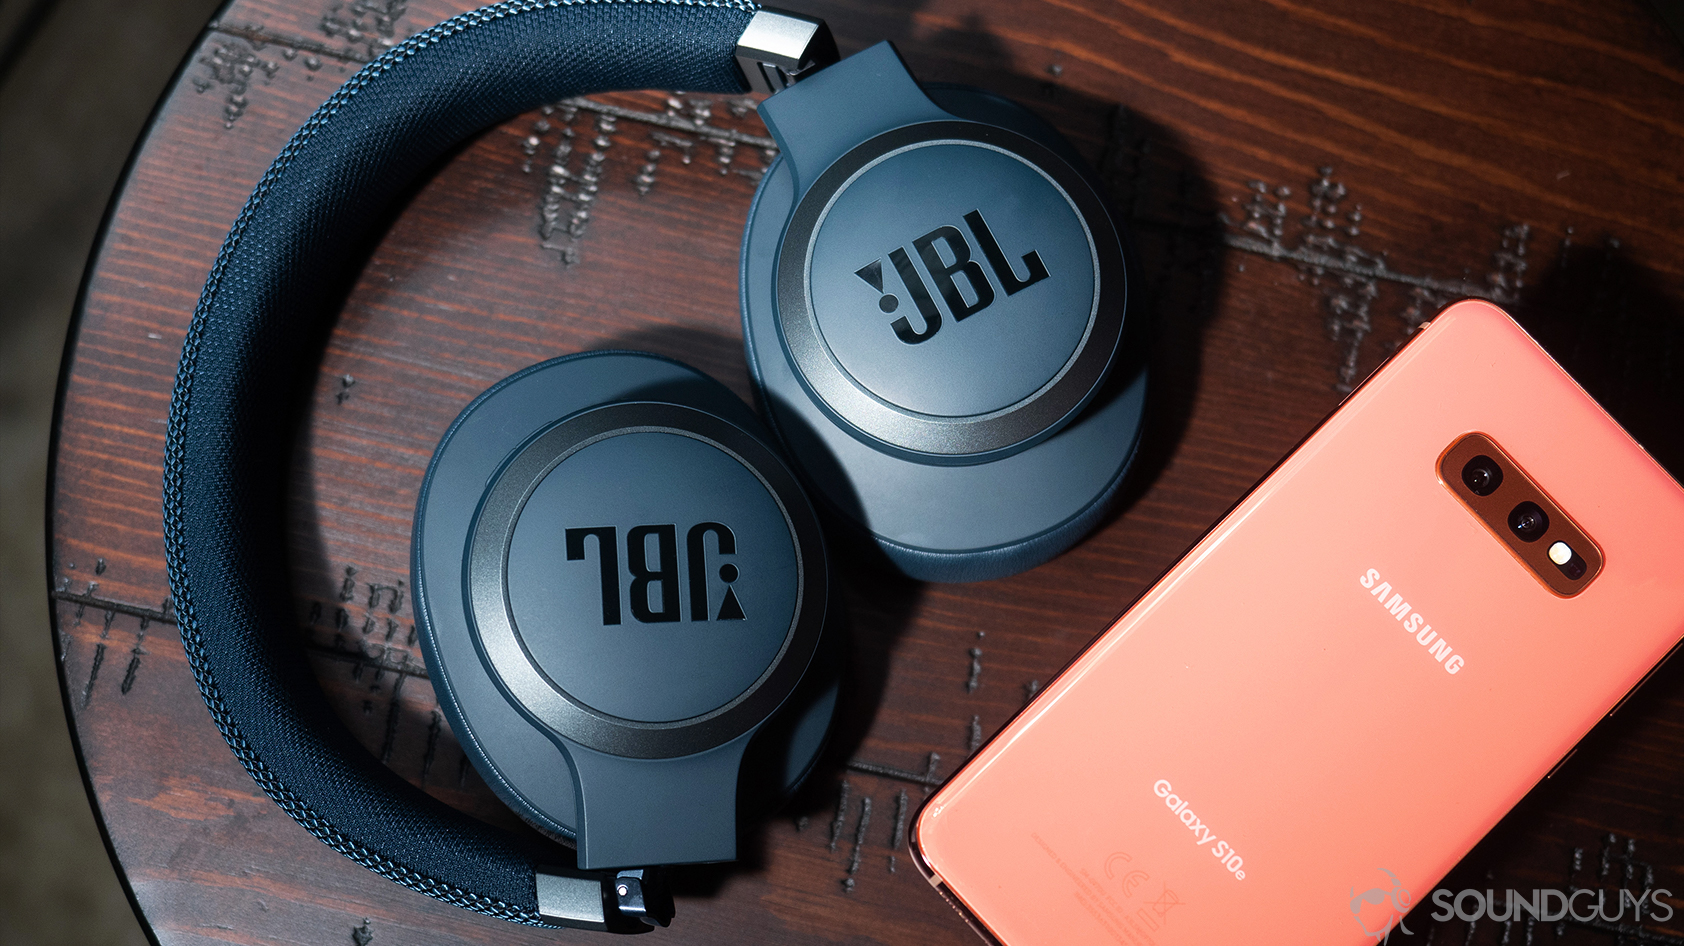 A picture of the JBL Live 650BTNC noise canceling headphones folded up and lying flat on a wooden surface by a Samsung Galaxy S10e smartphone.